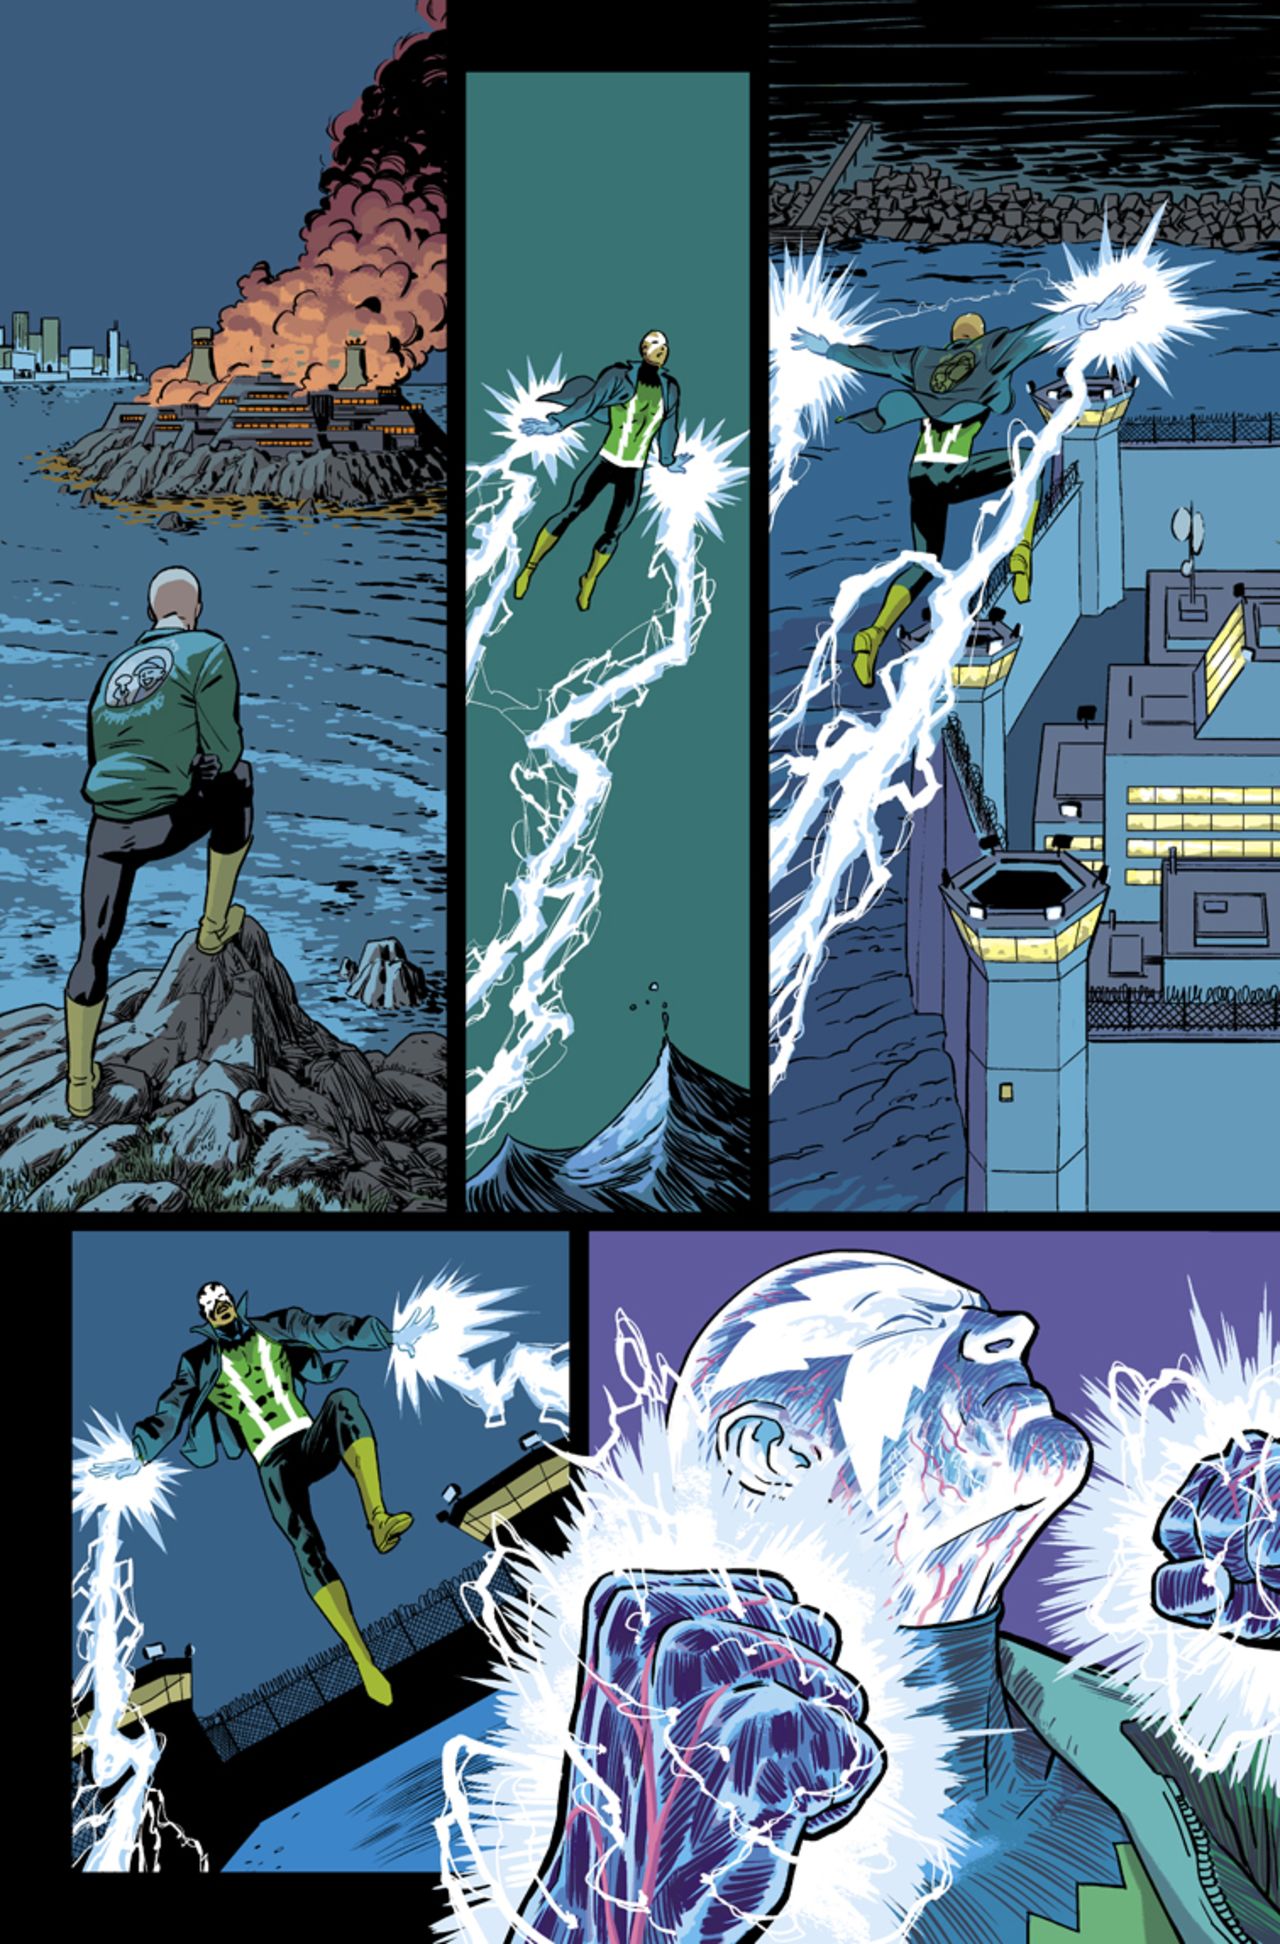 More of Electro's appearance in "Amazing Spider-Man" #1.